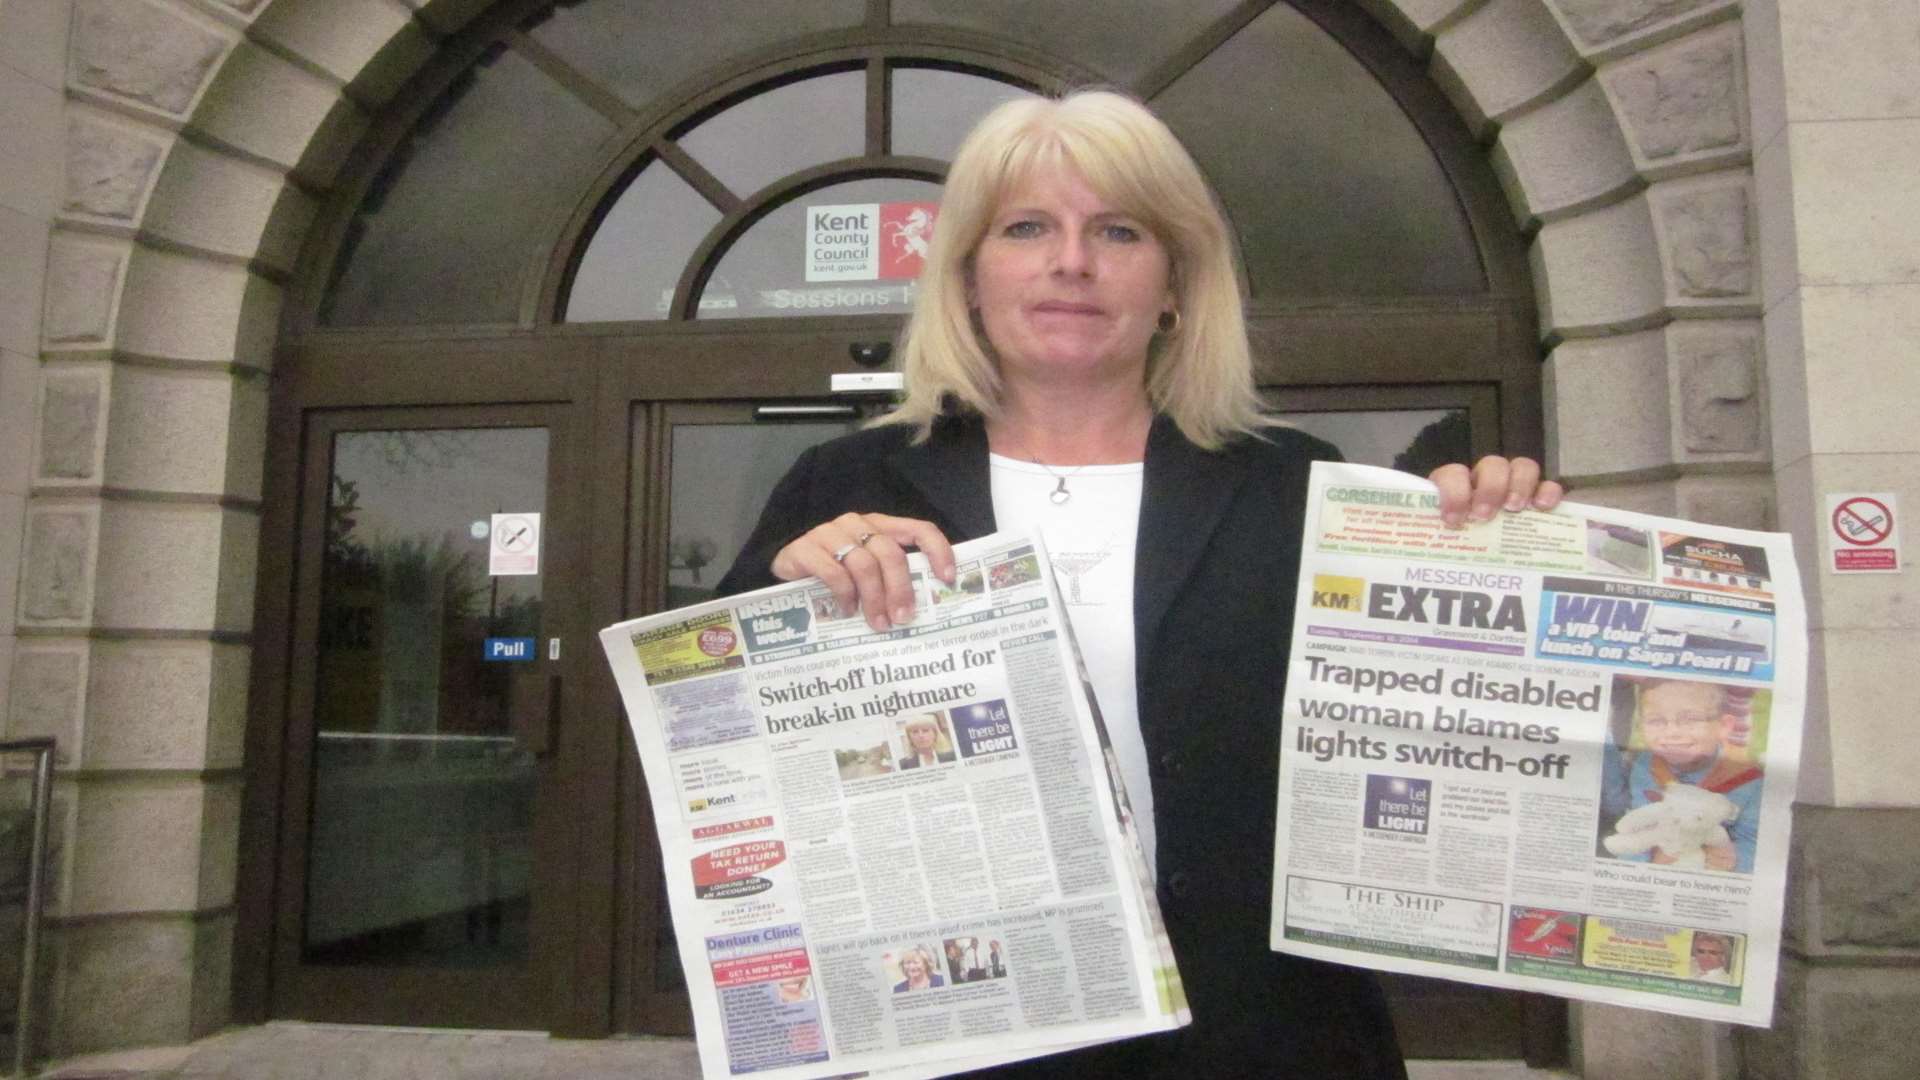 Tina Brooker took her fight to County Hall